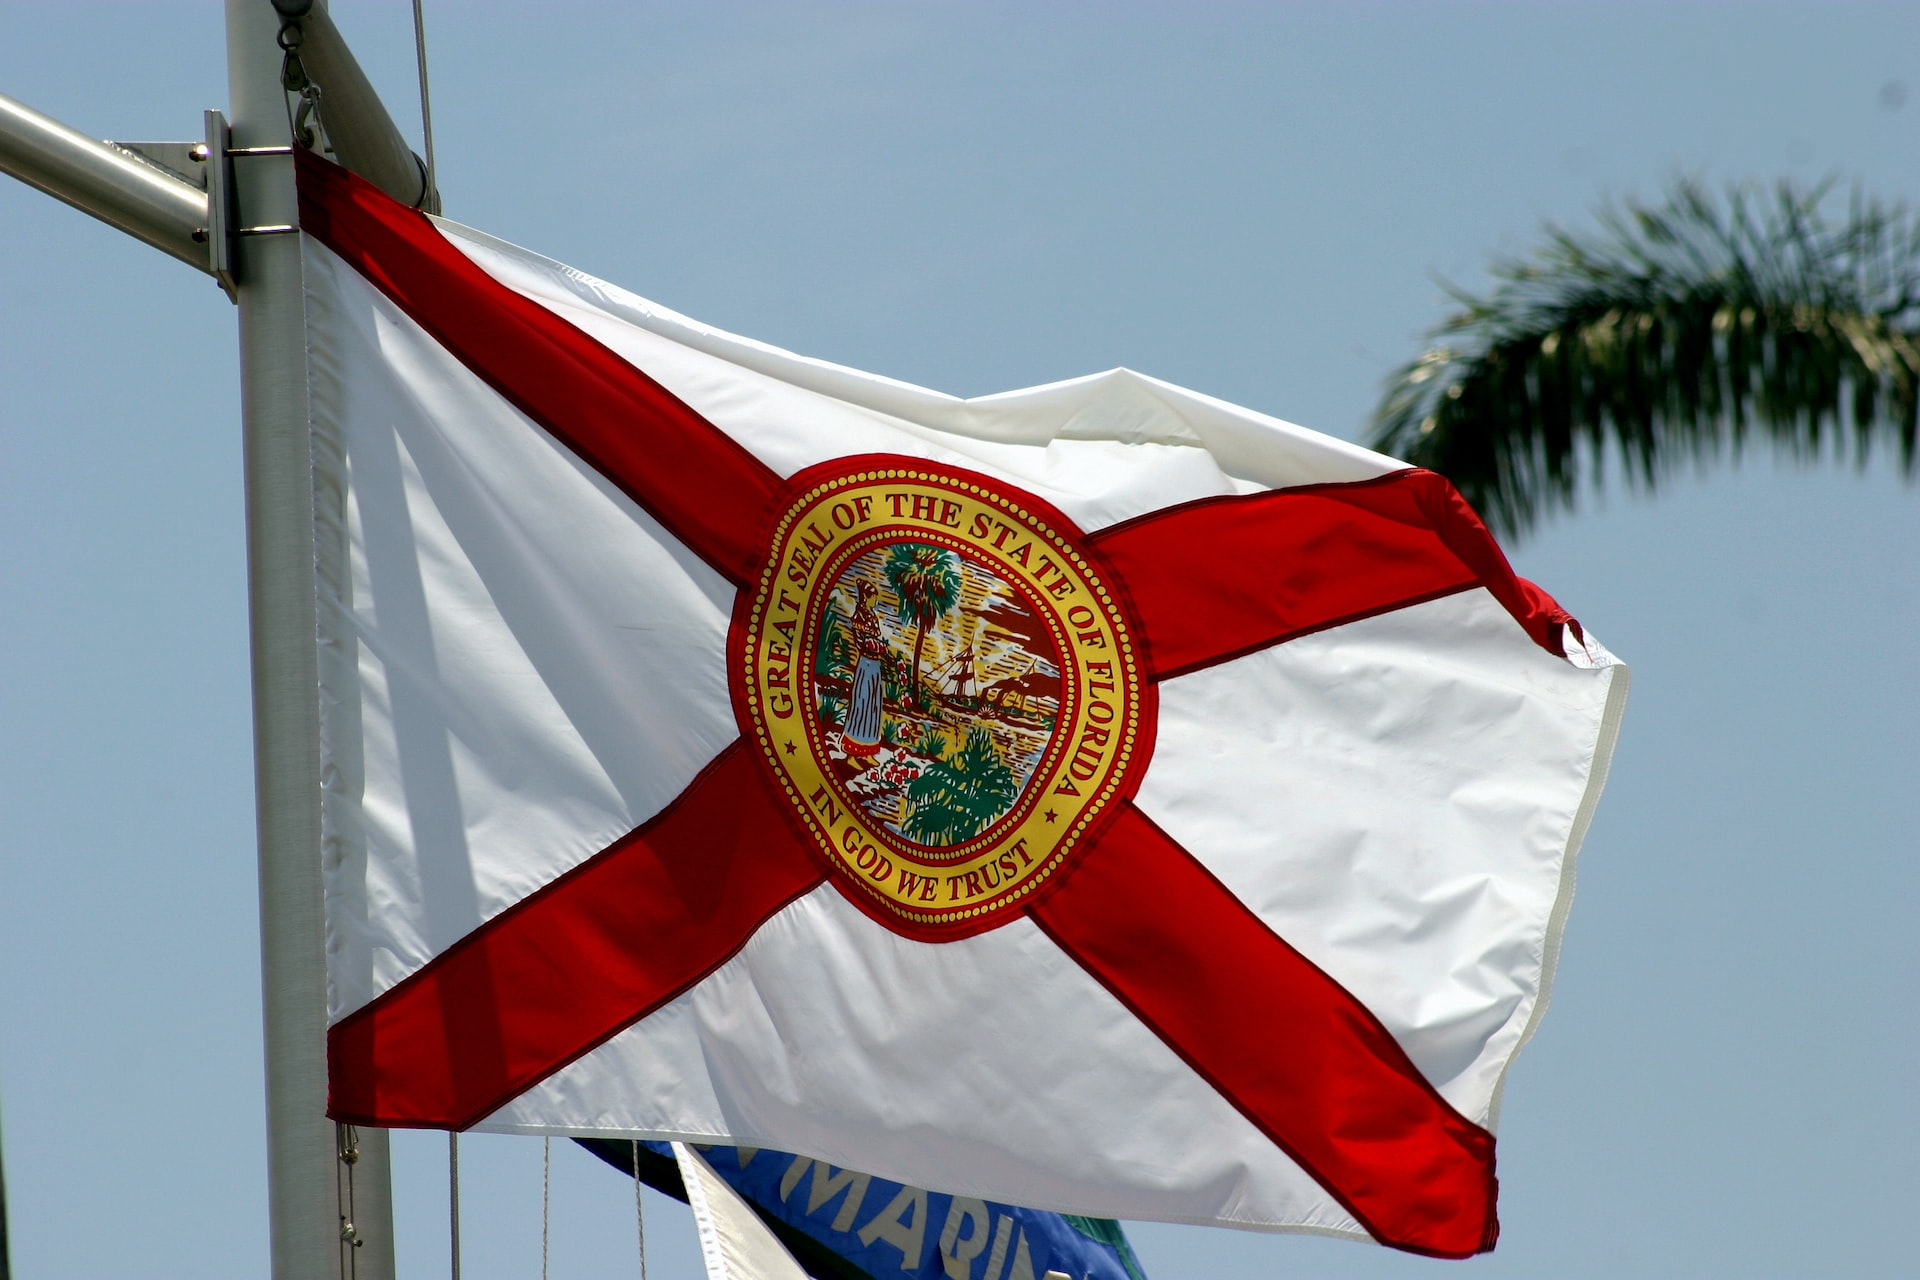 The state flag of Florida flies on a ship's mast | Veteran Car Donations